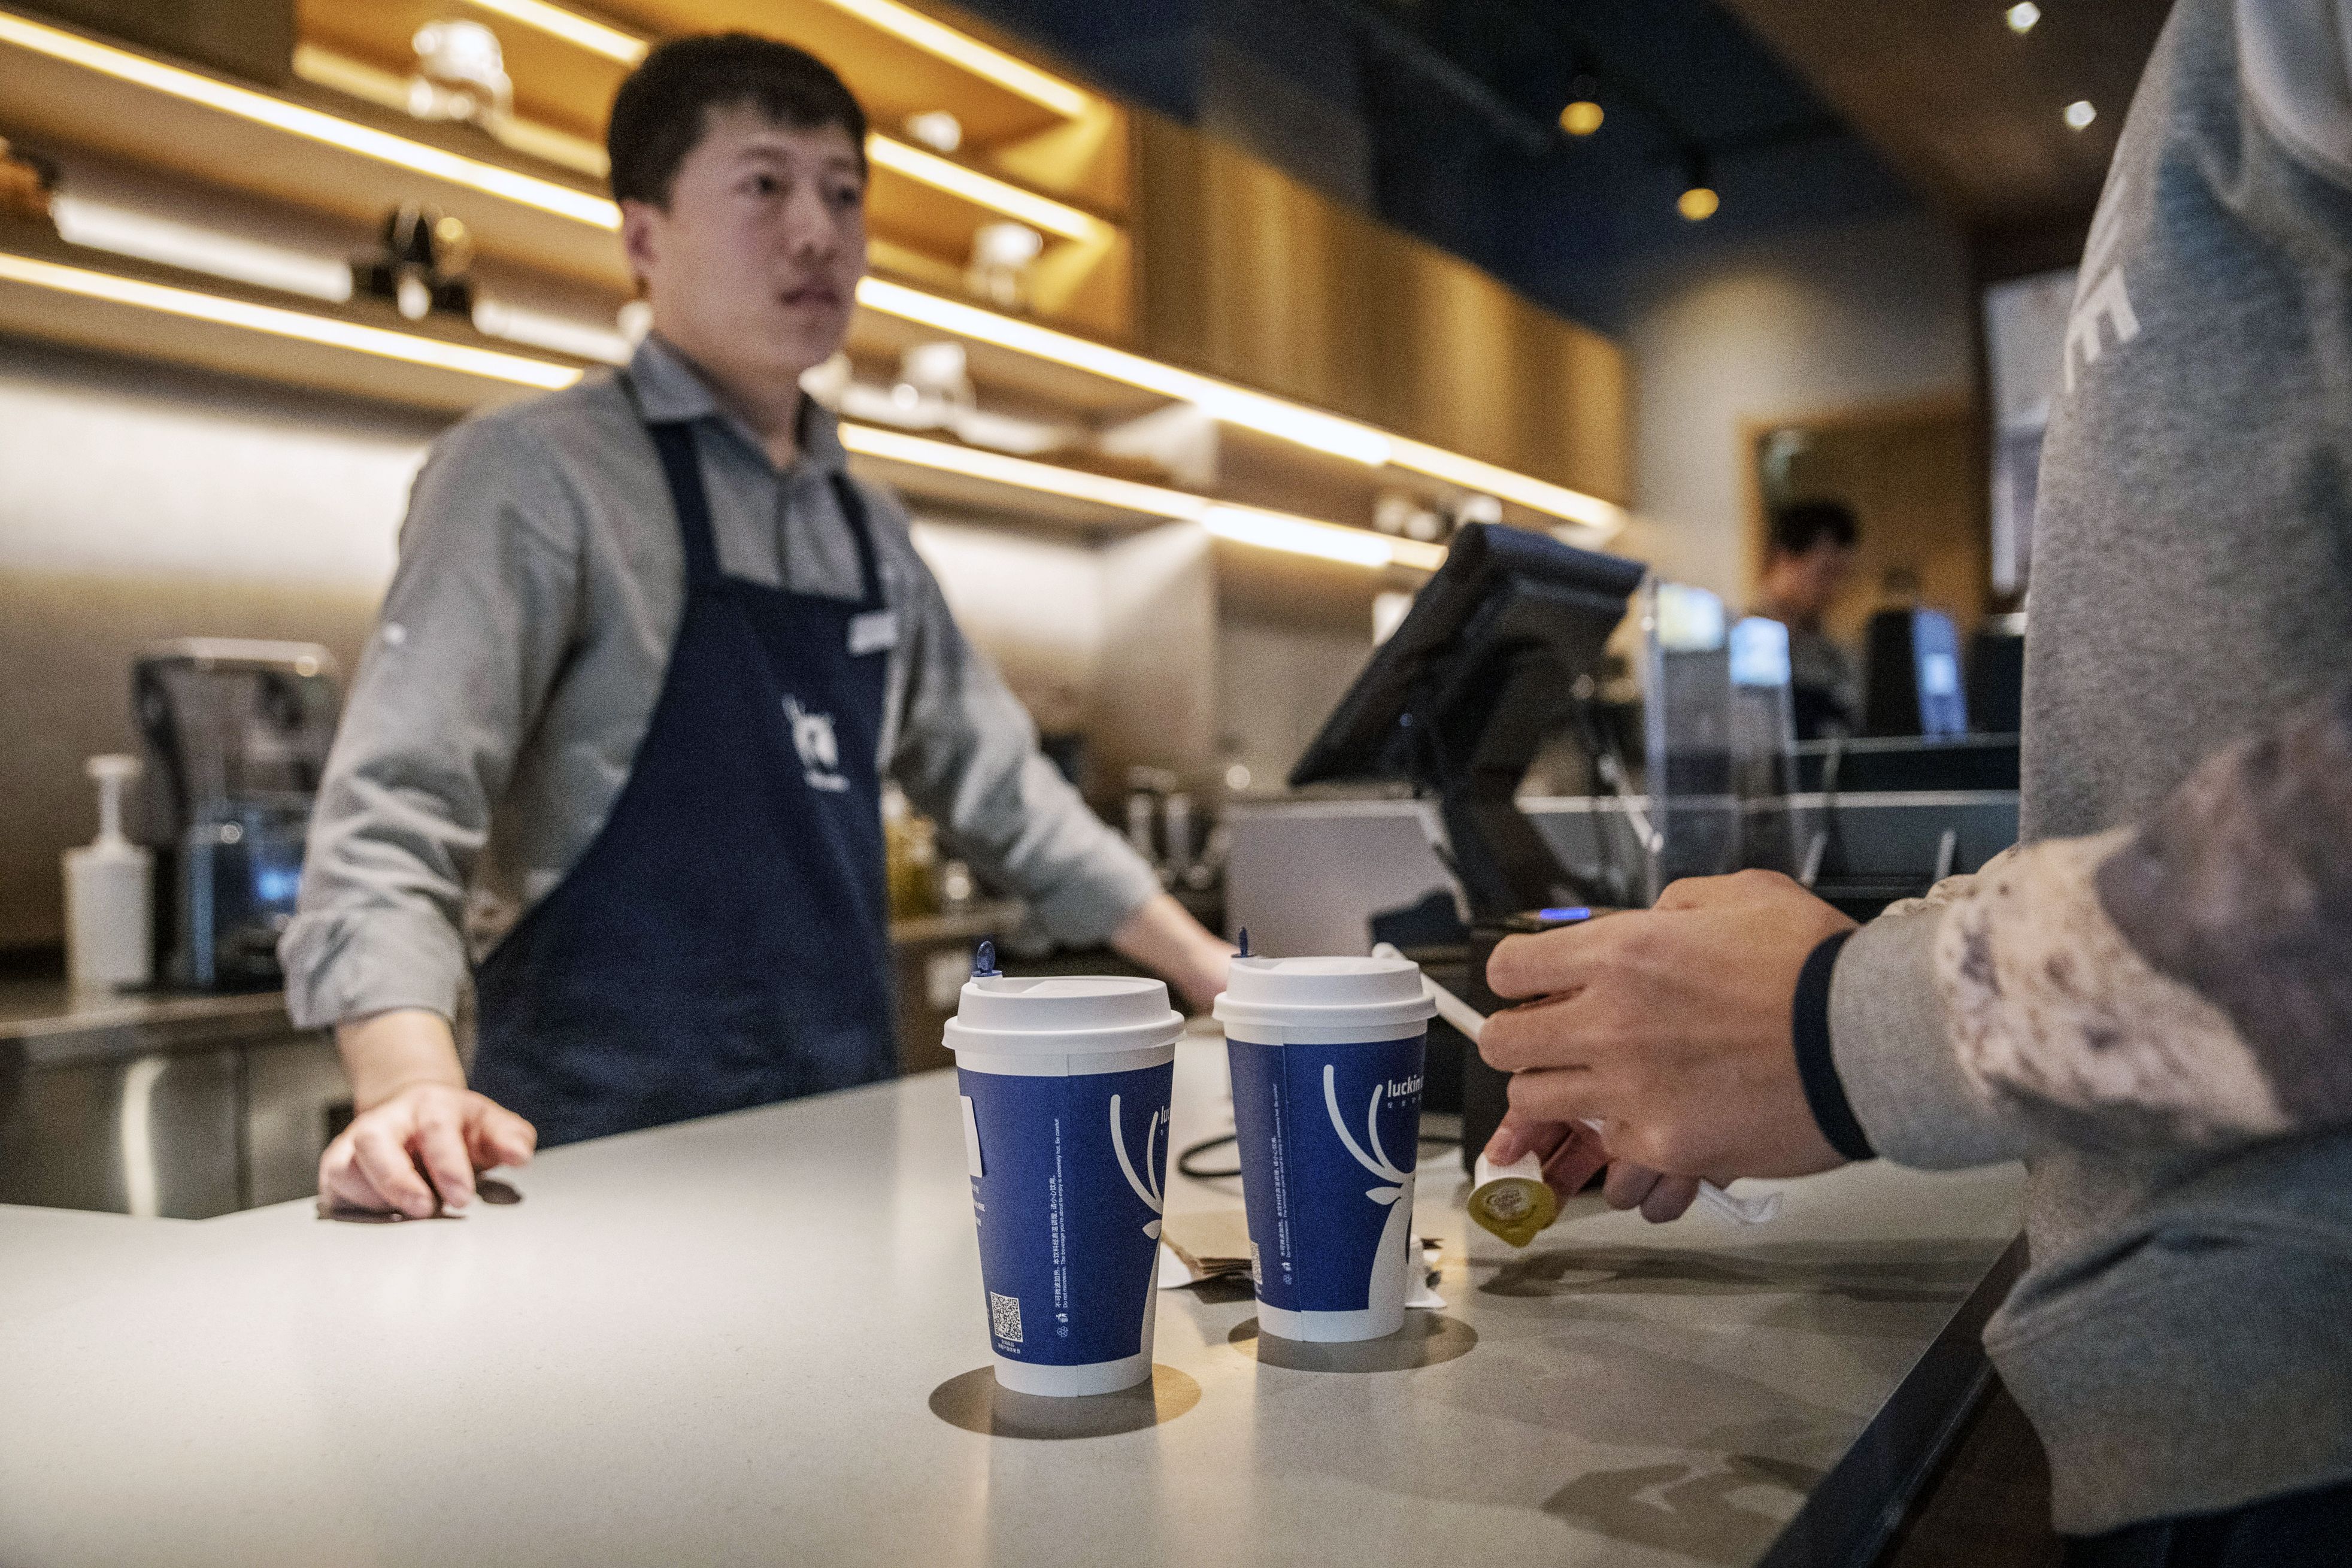 China-based Luckin Coffee CFO on IPO day on differences from Starbucks